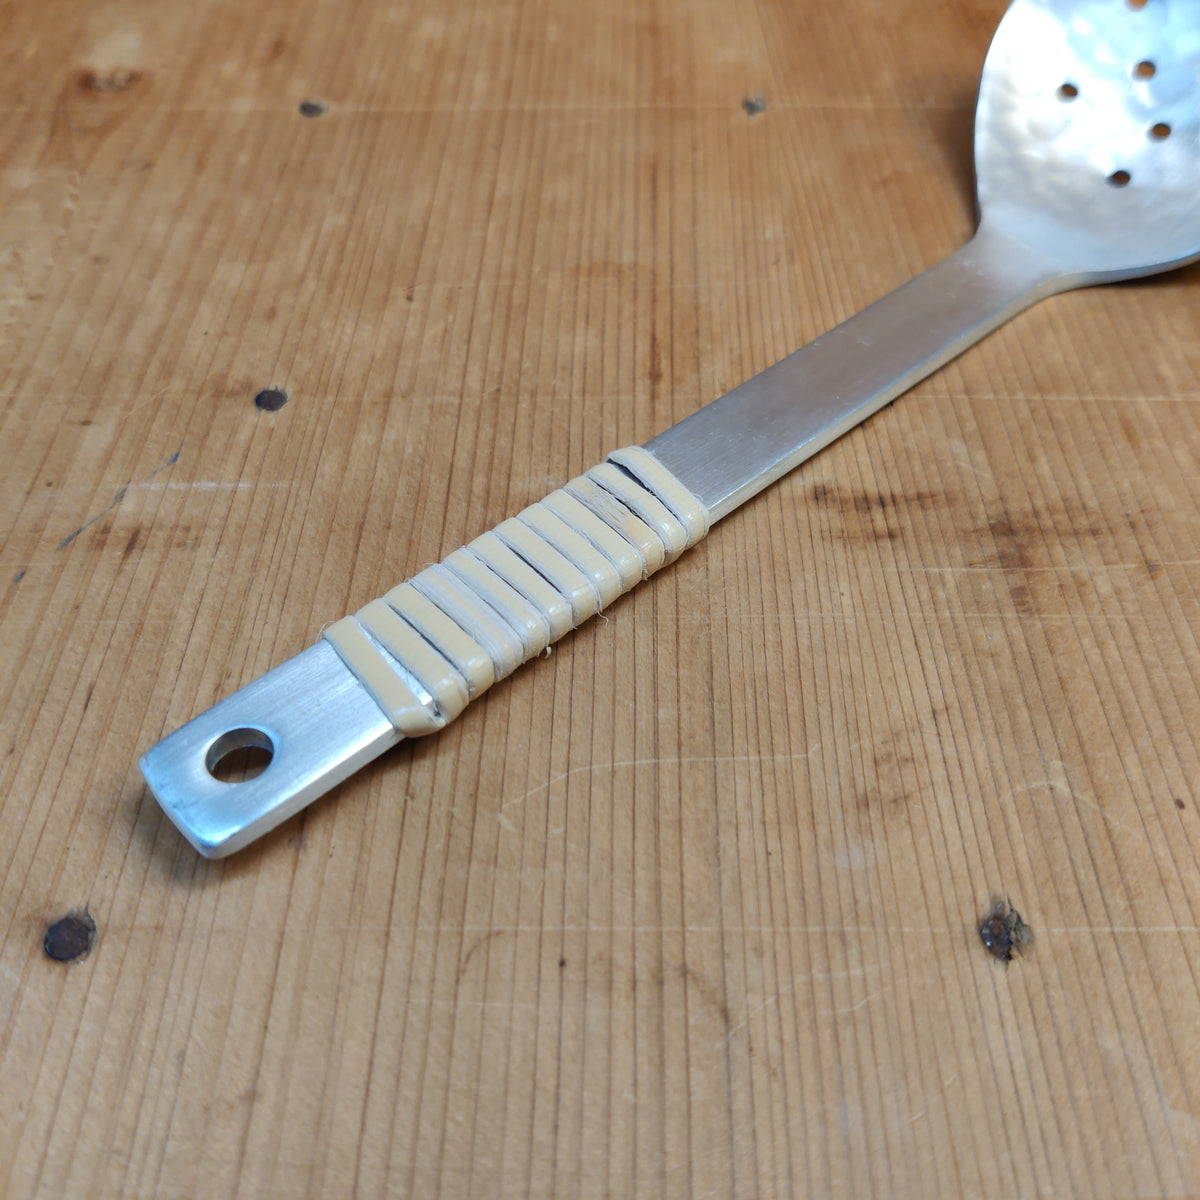 Aluminum Serving Spoon - Round with Holes